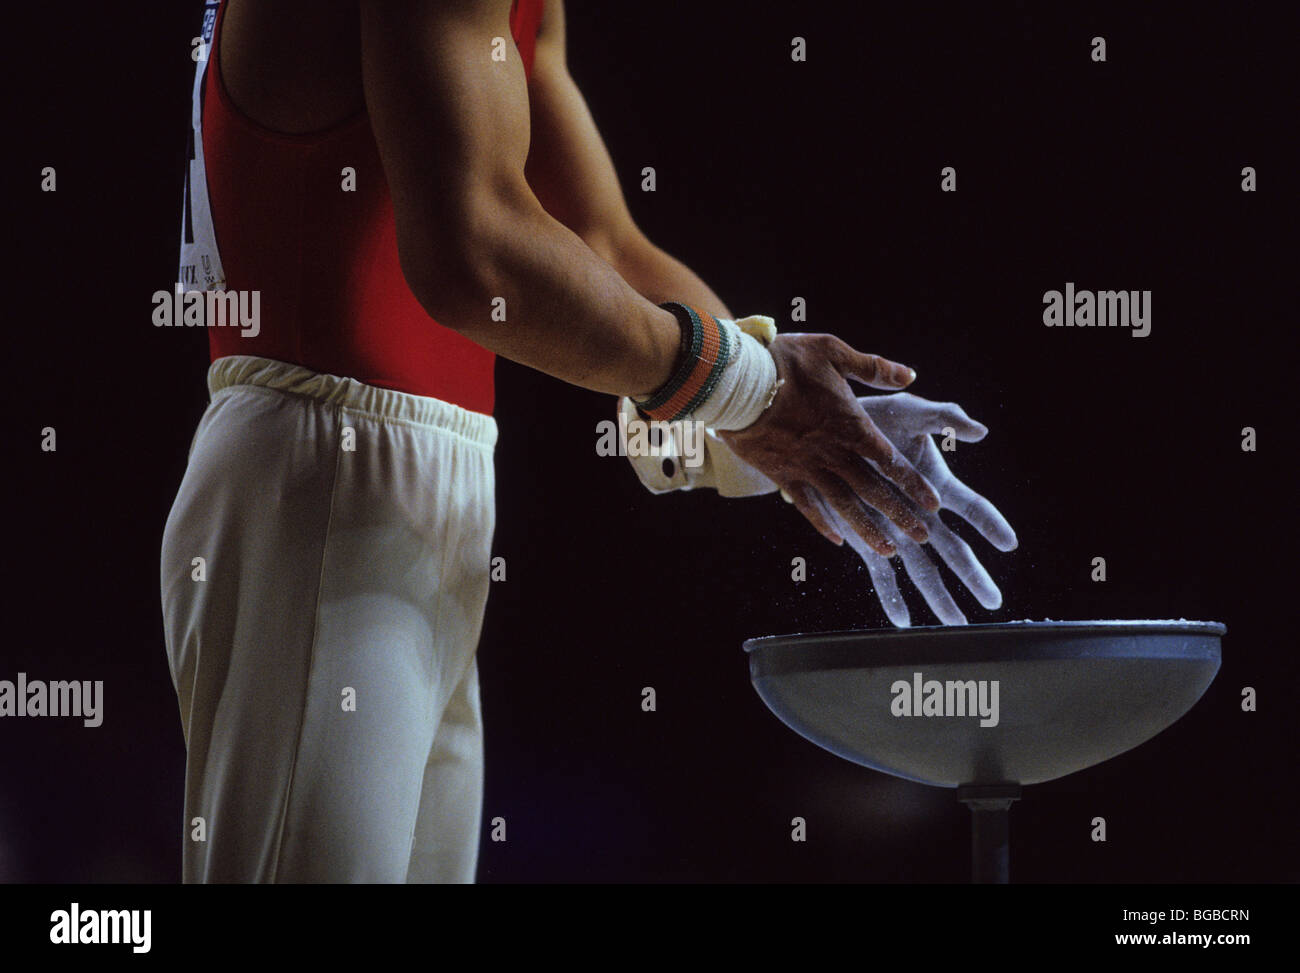 male gymnast chalking hands Stock Photo